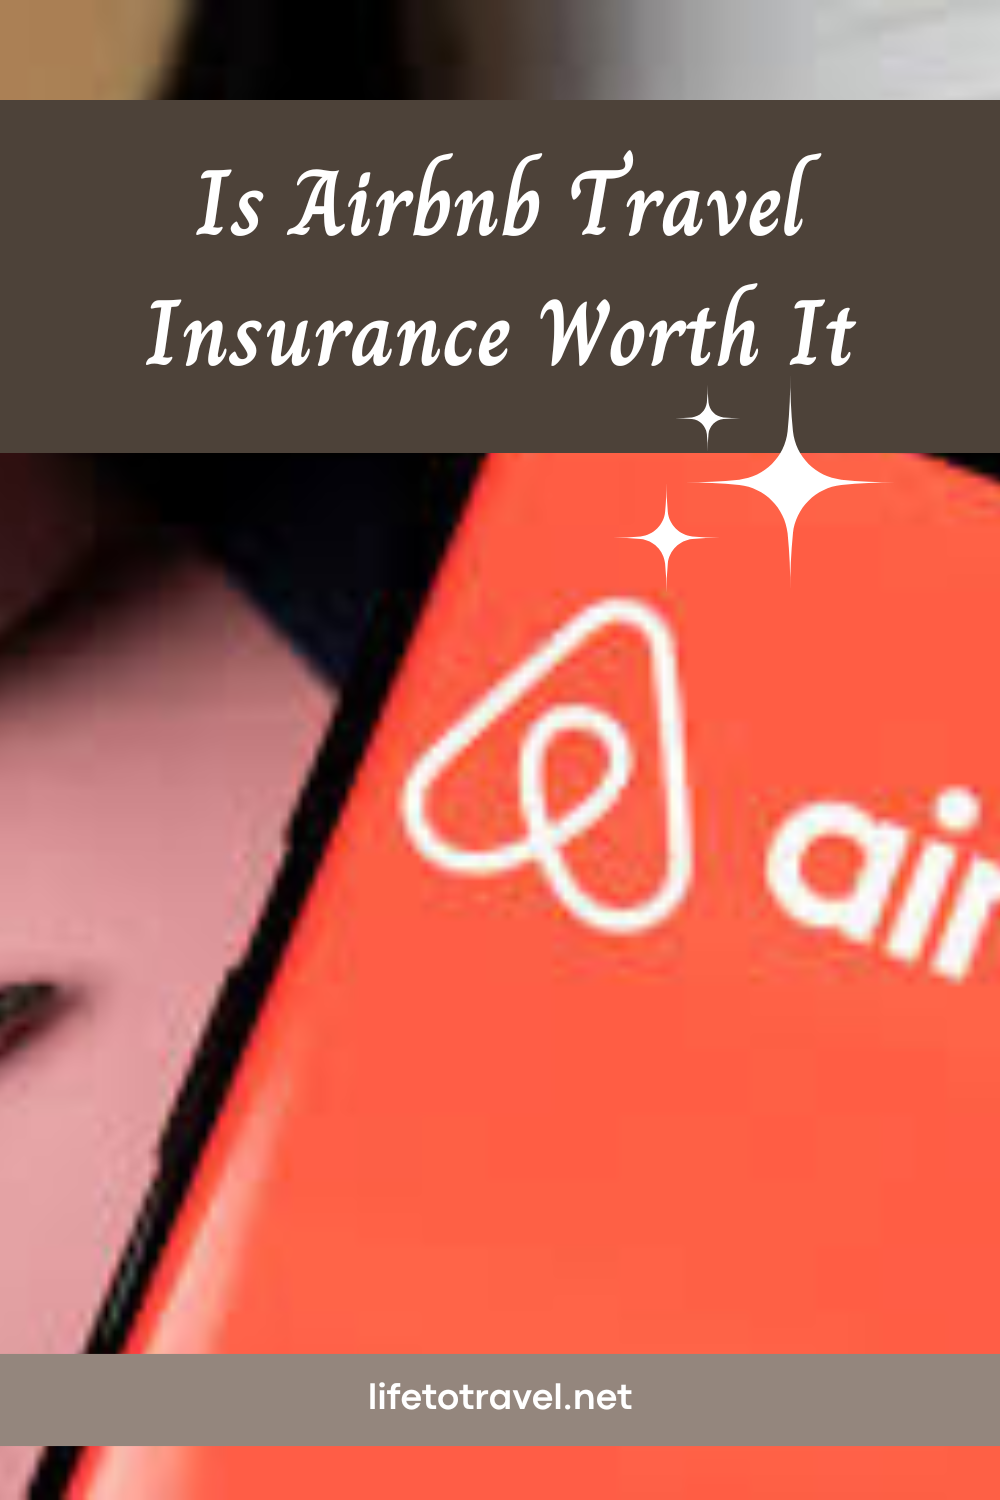 should i get travel insurance through airbnb